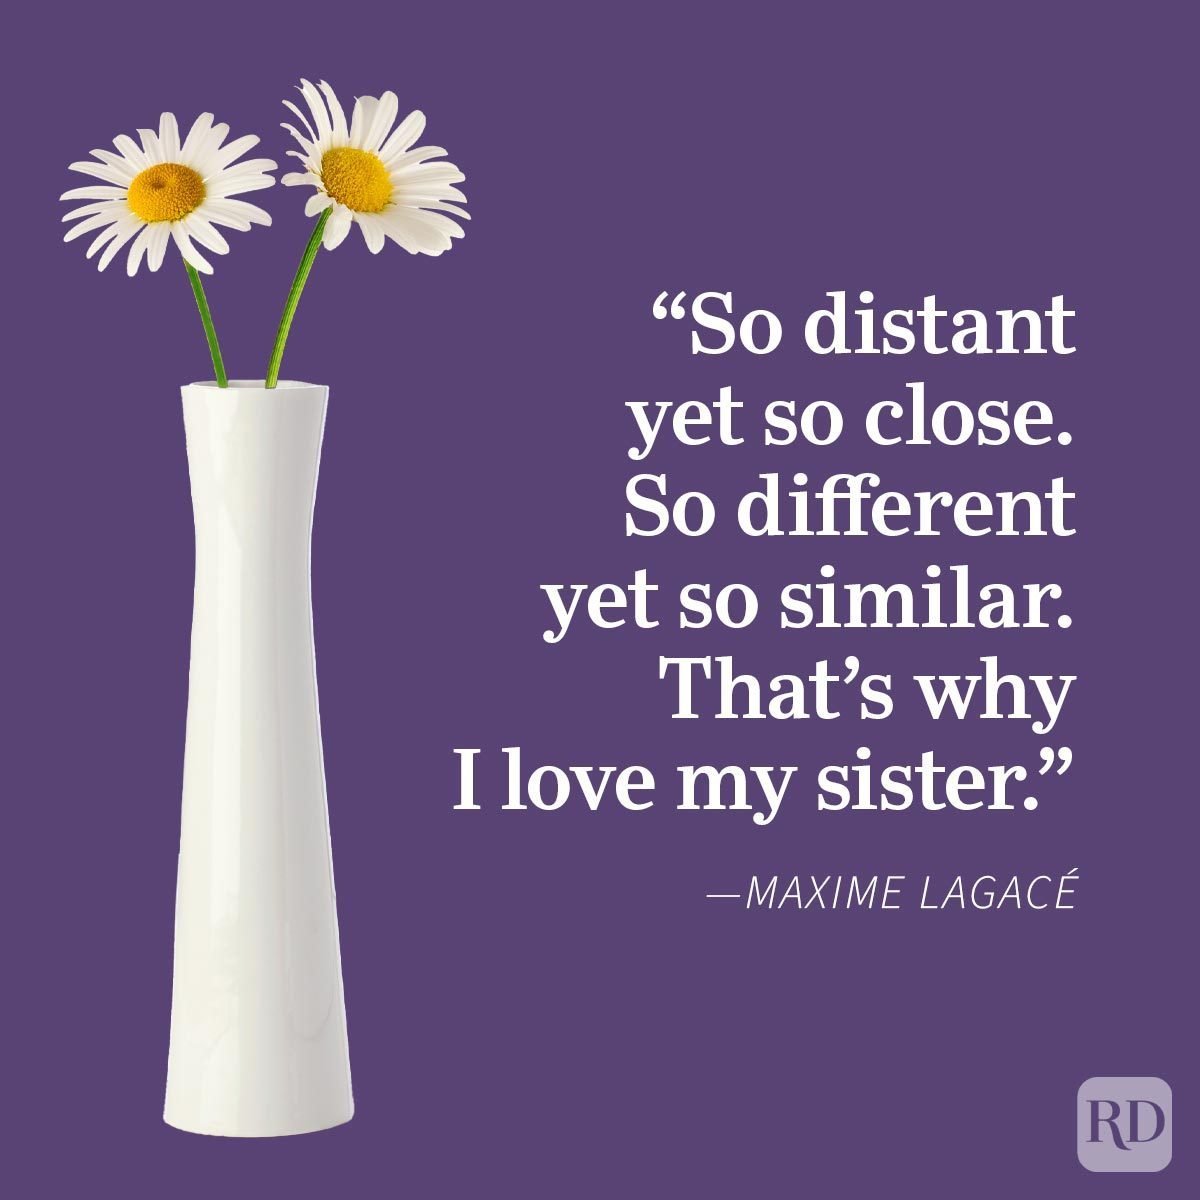 Sister Quotes That Perfectly Sum Up Your Relationship Maxime Lagacé, white daisies in a vase, purple